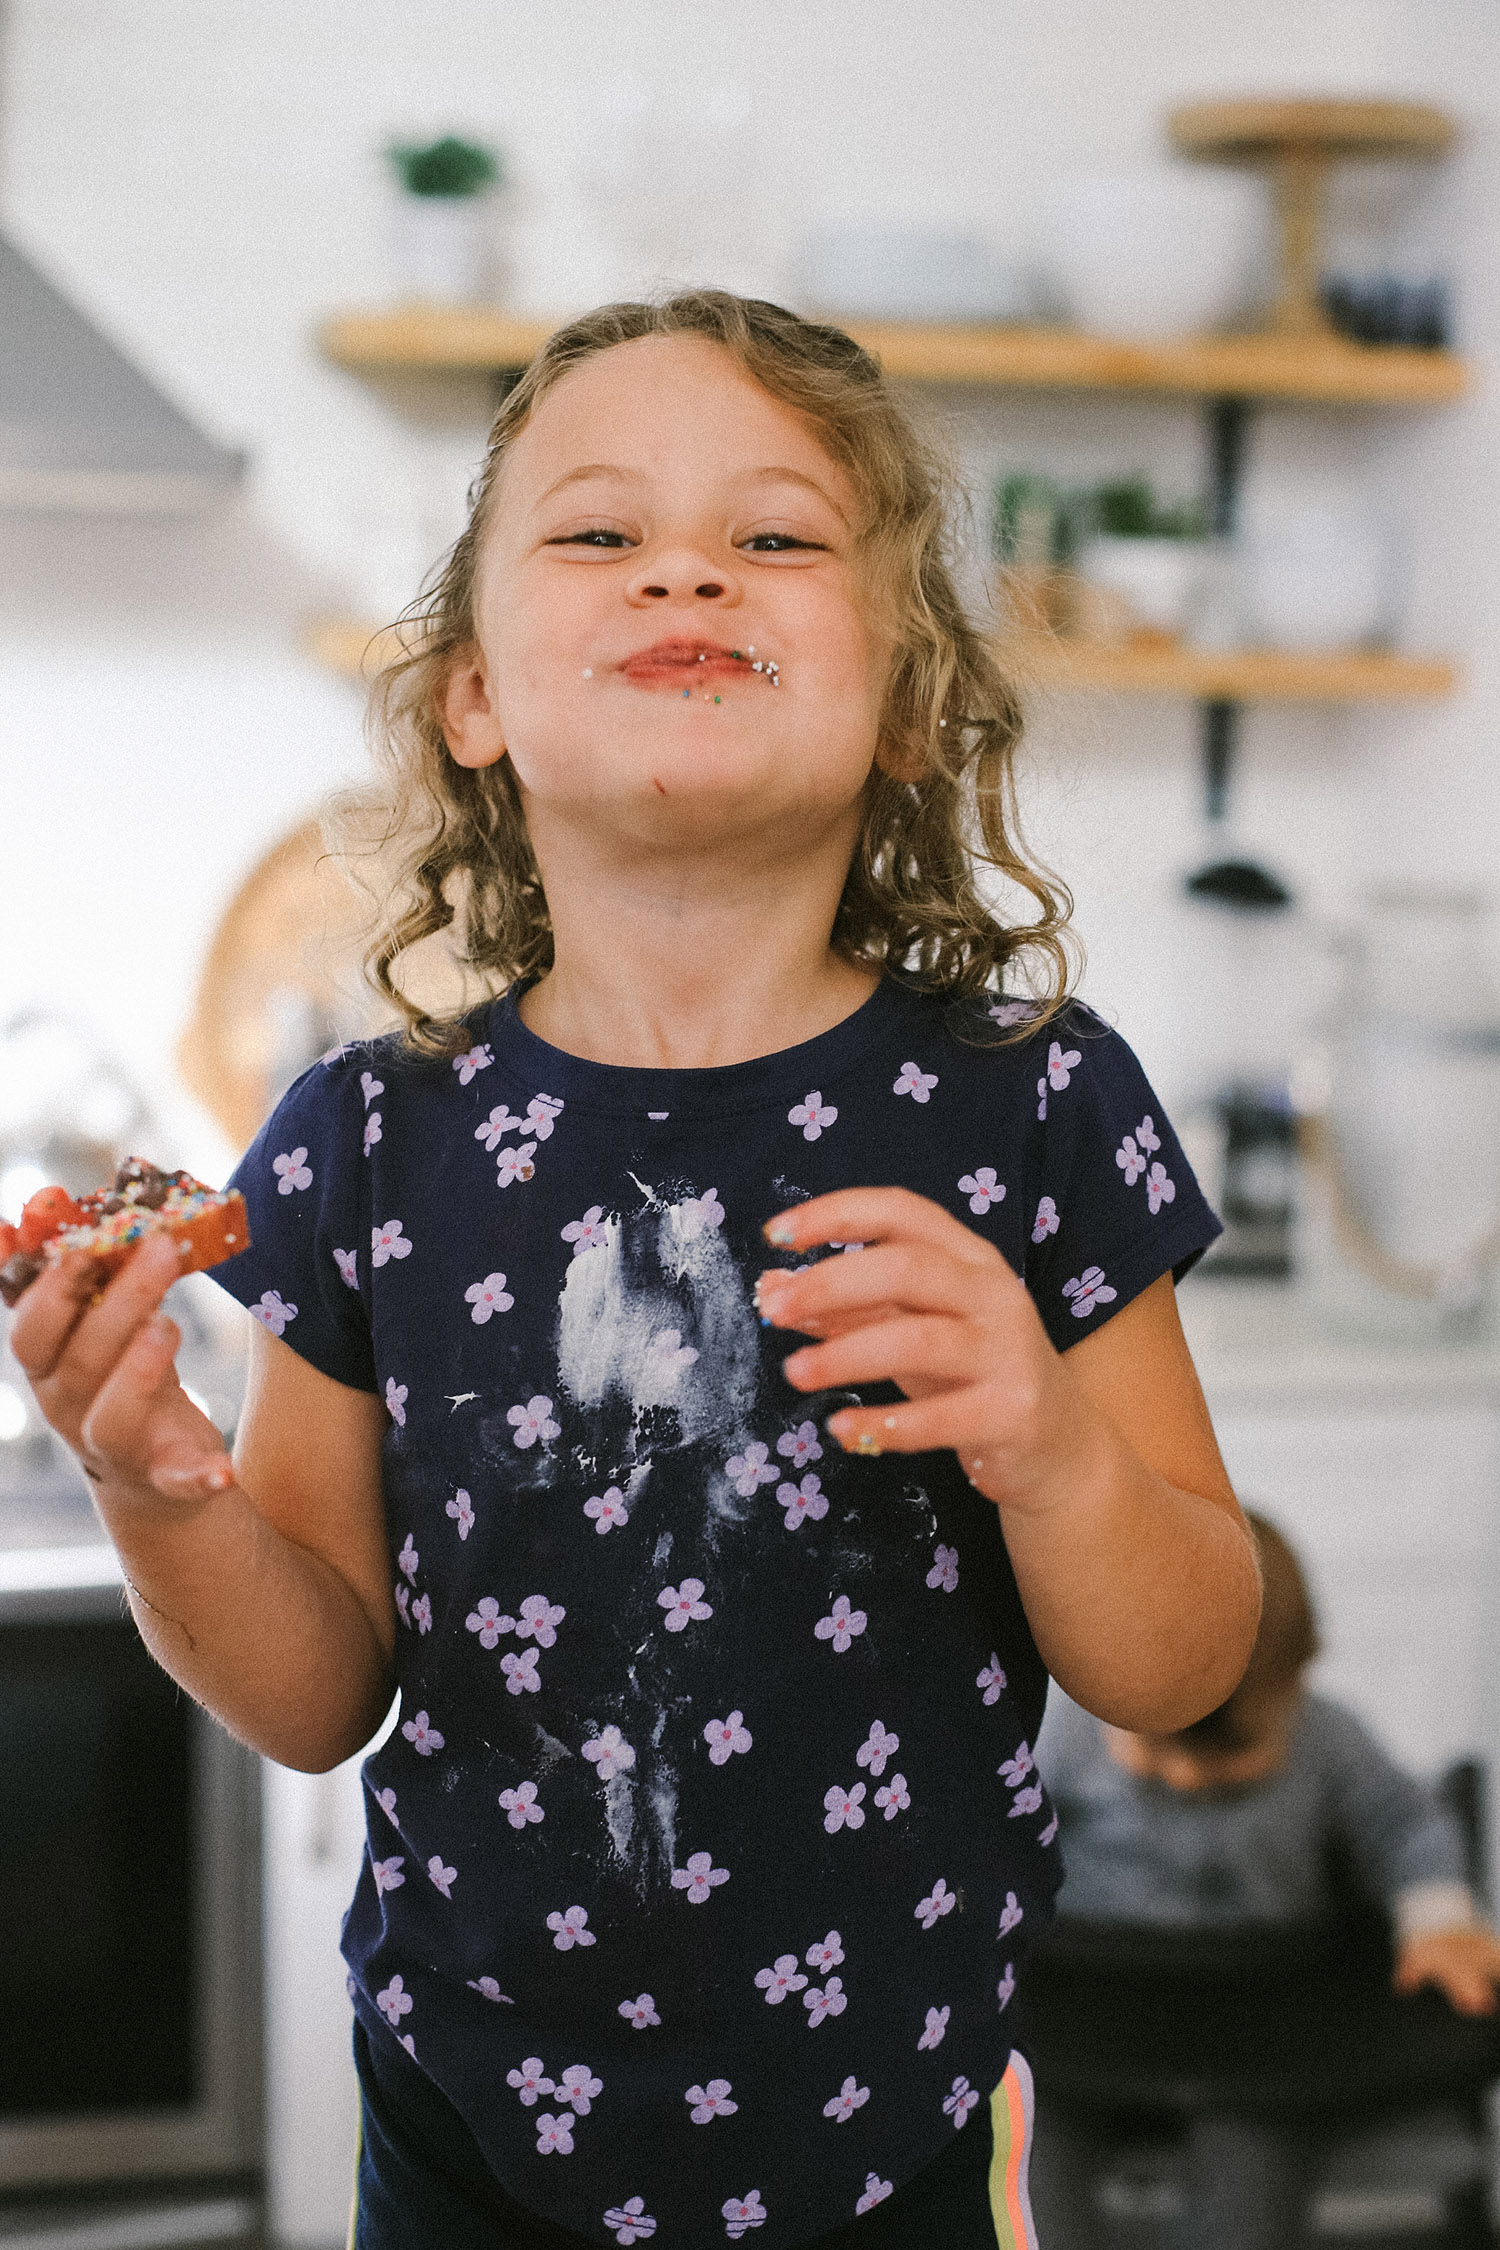 Easy snack ideas for a healthy sweet snacktivity for kids! Apple Donut fun recipe for kids from top Florida blogger Tabitha Blue of Fresh Mommy Blog | Apple Donuts by popular Florida motherhood blog, Fresh Mommy Blog: image of a young girl eating a apple donut. 